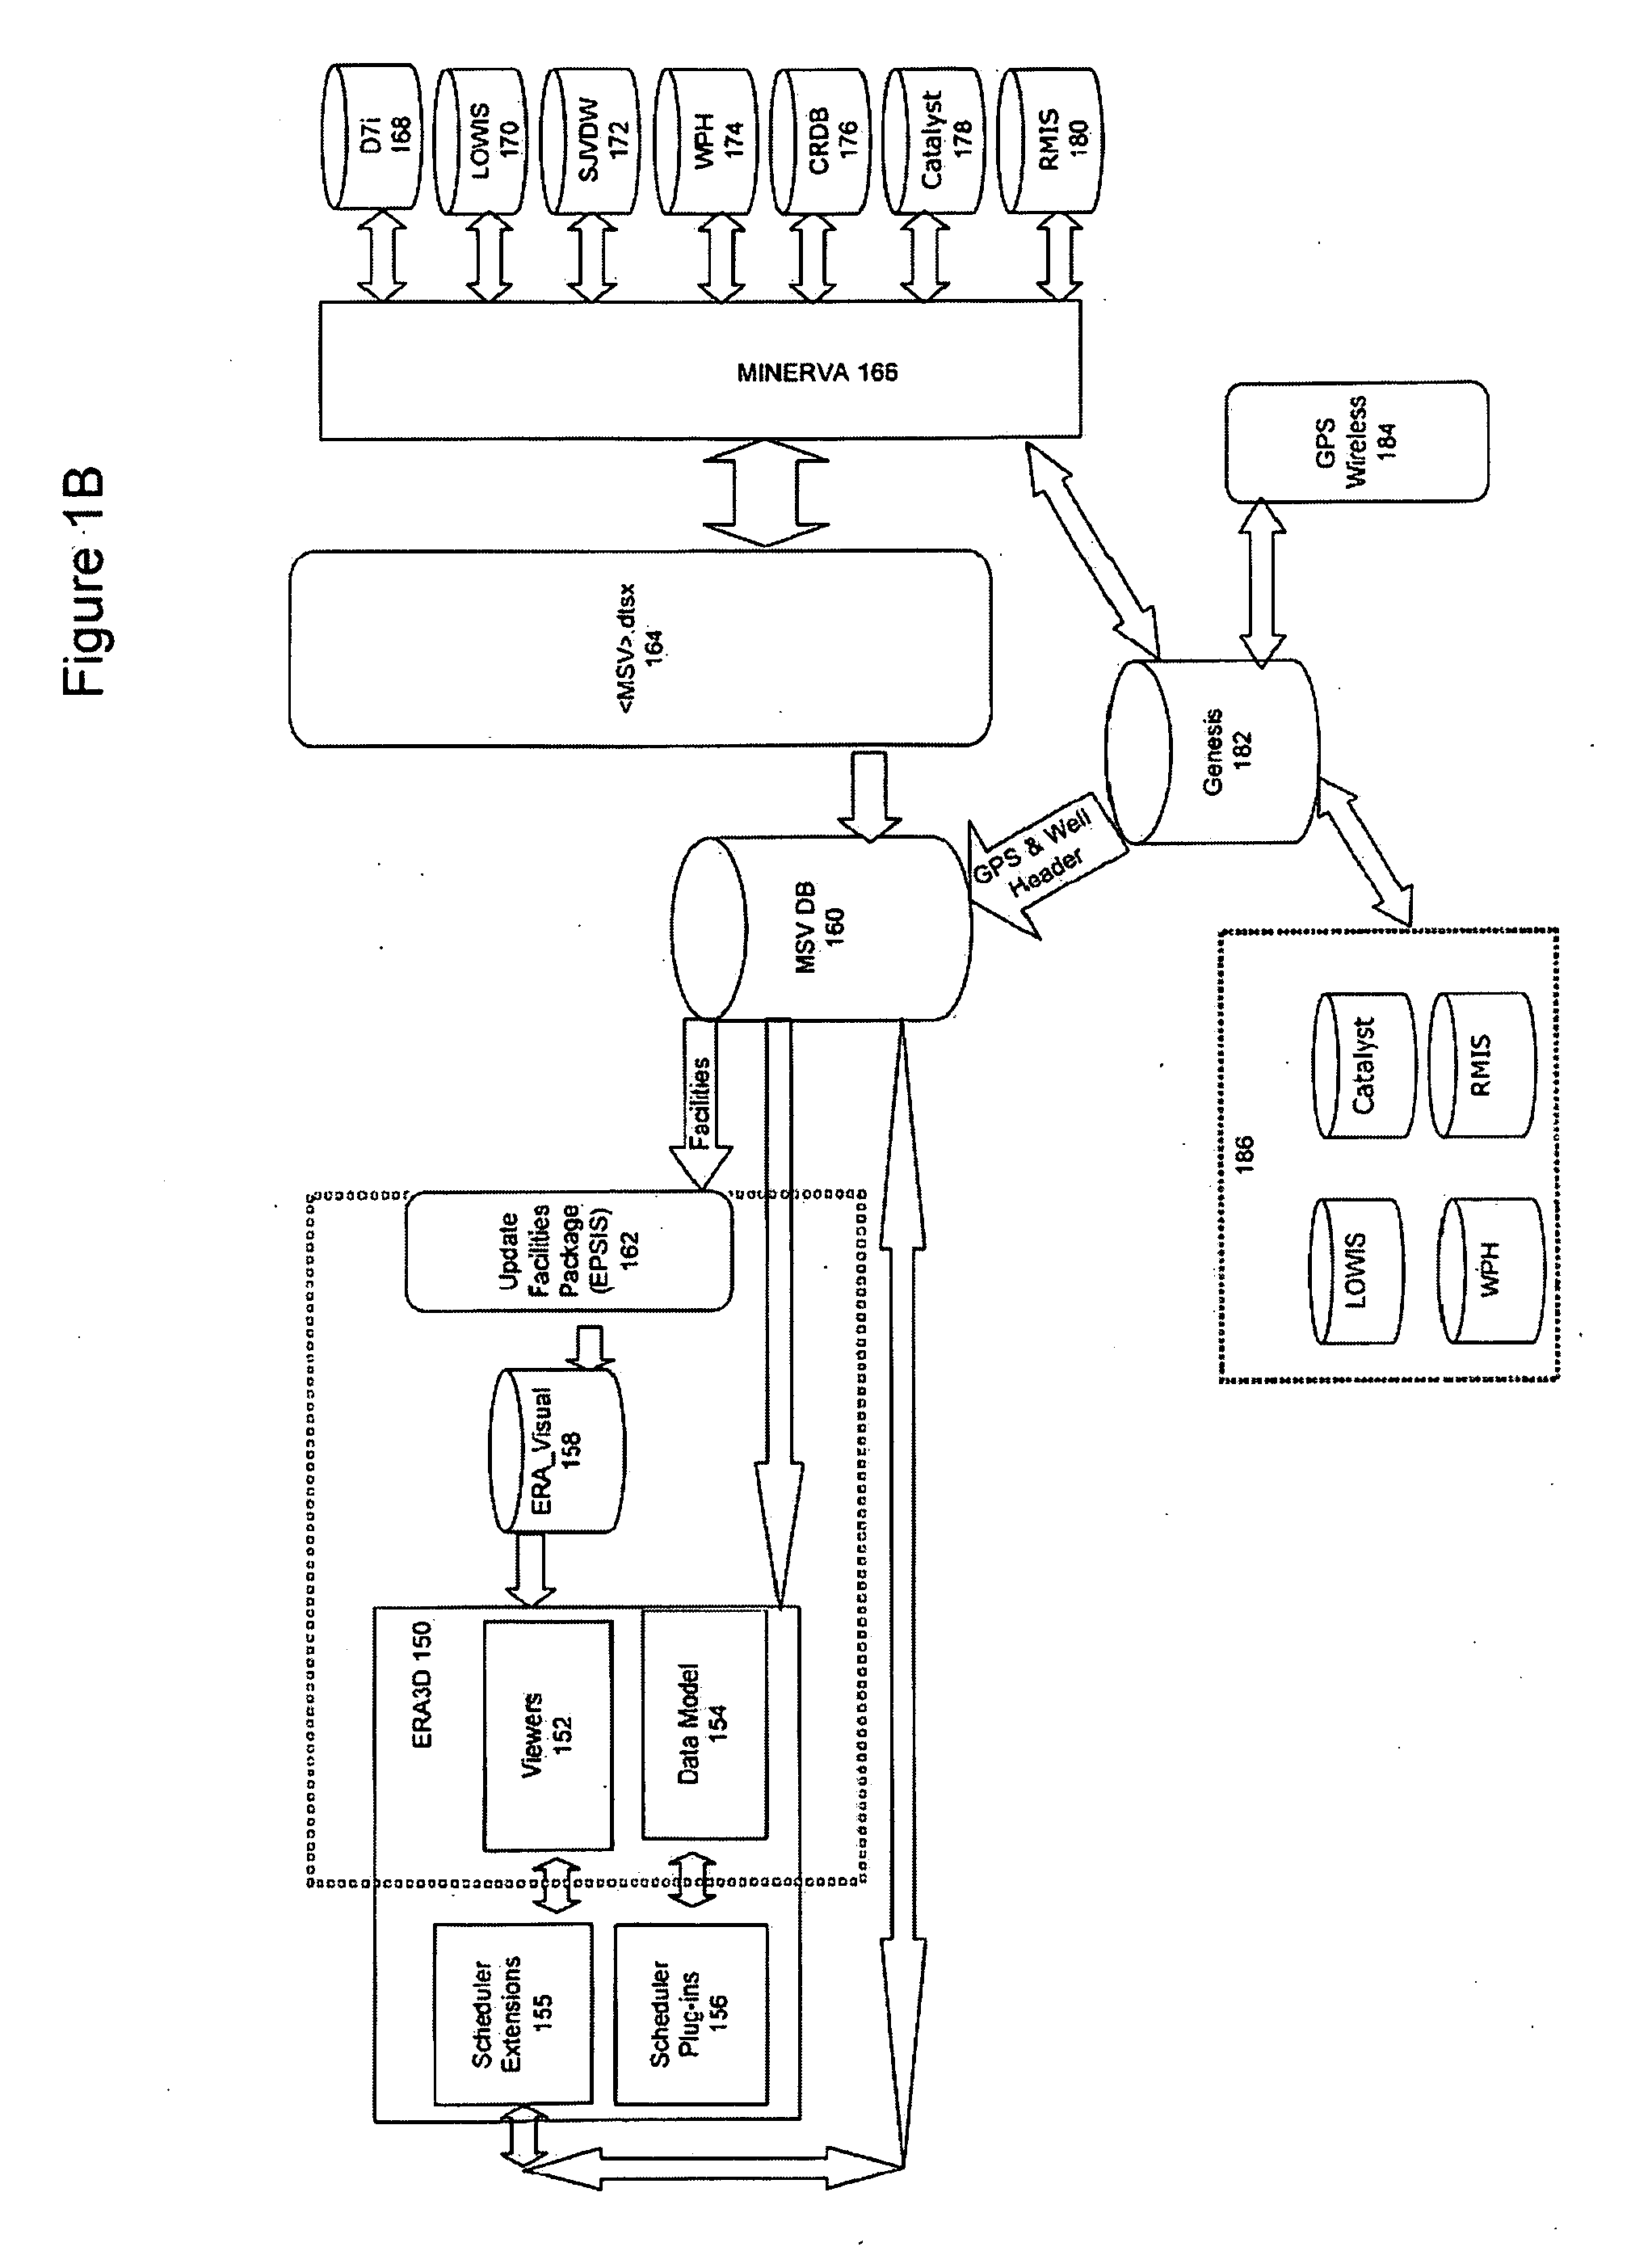 Systems and methods for managing large oil field operations